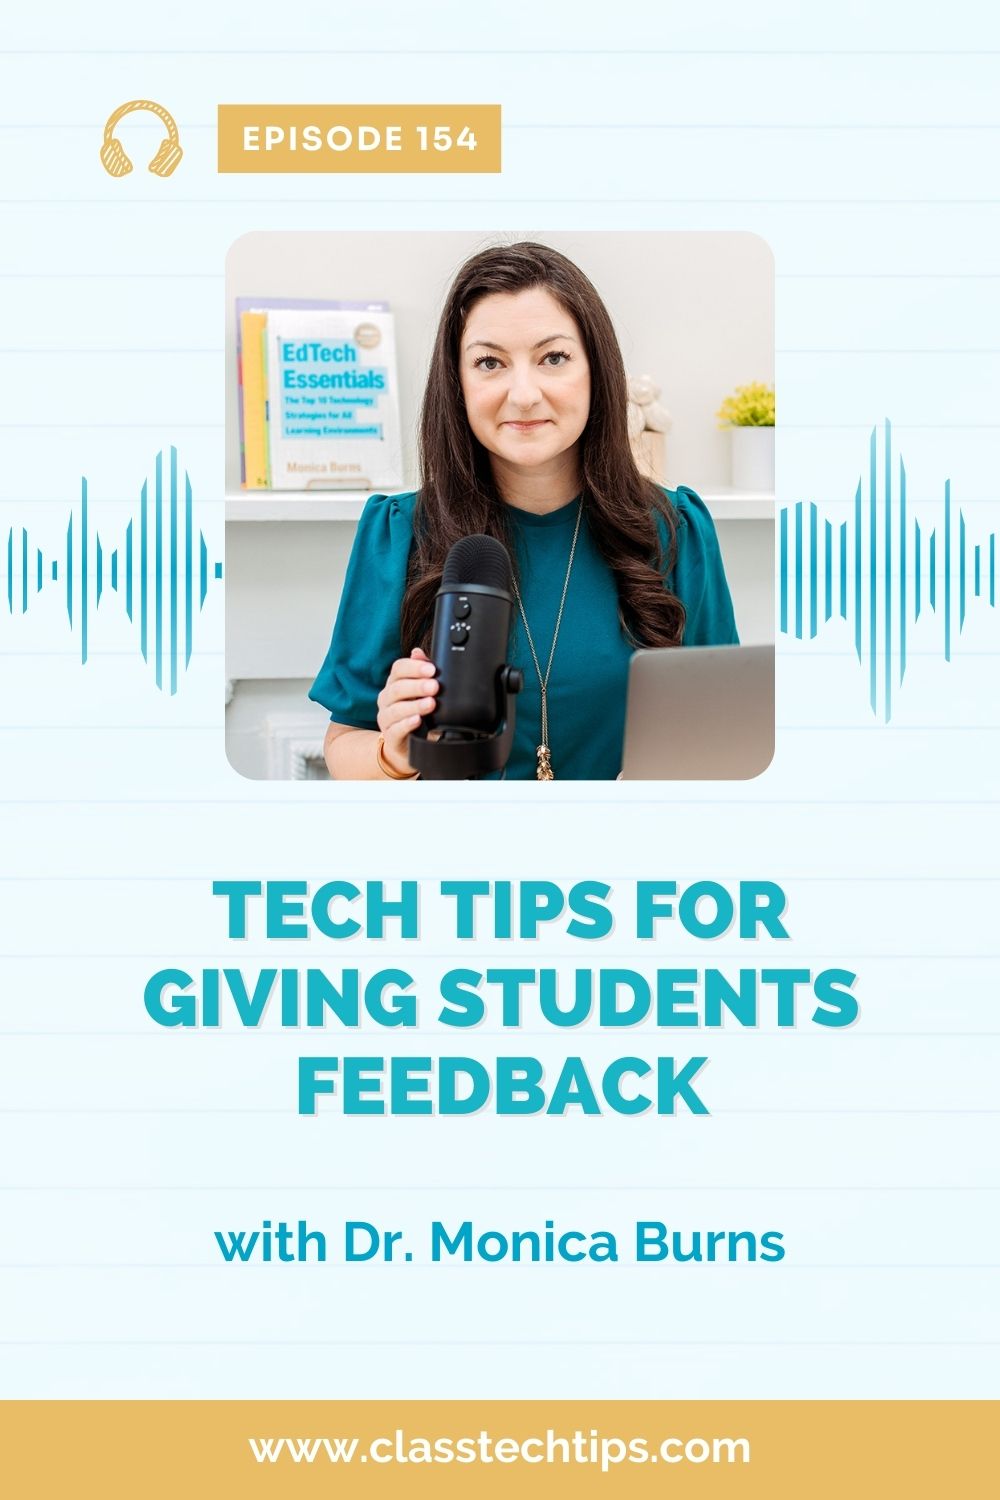 This episode is all about providing feedback to students in digital spaces with EdTech tools for teacher feedback and tips peer feedback.